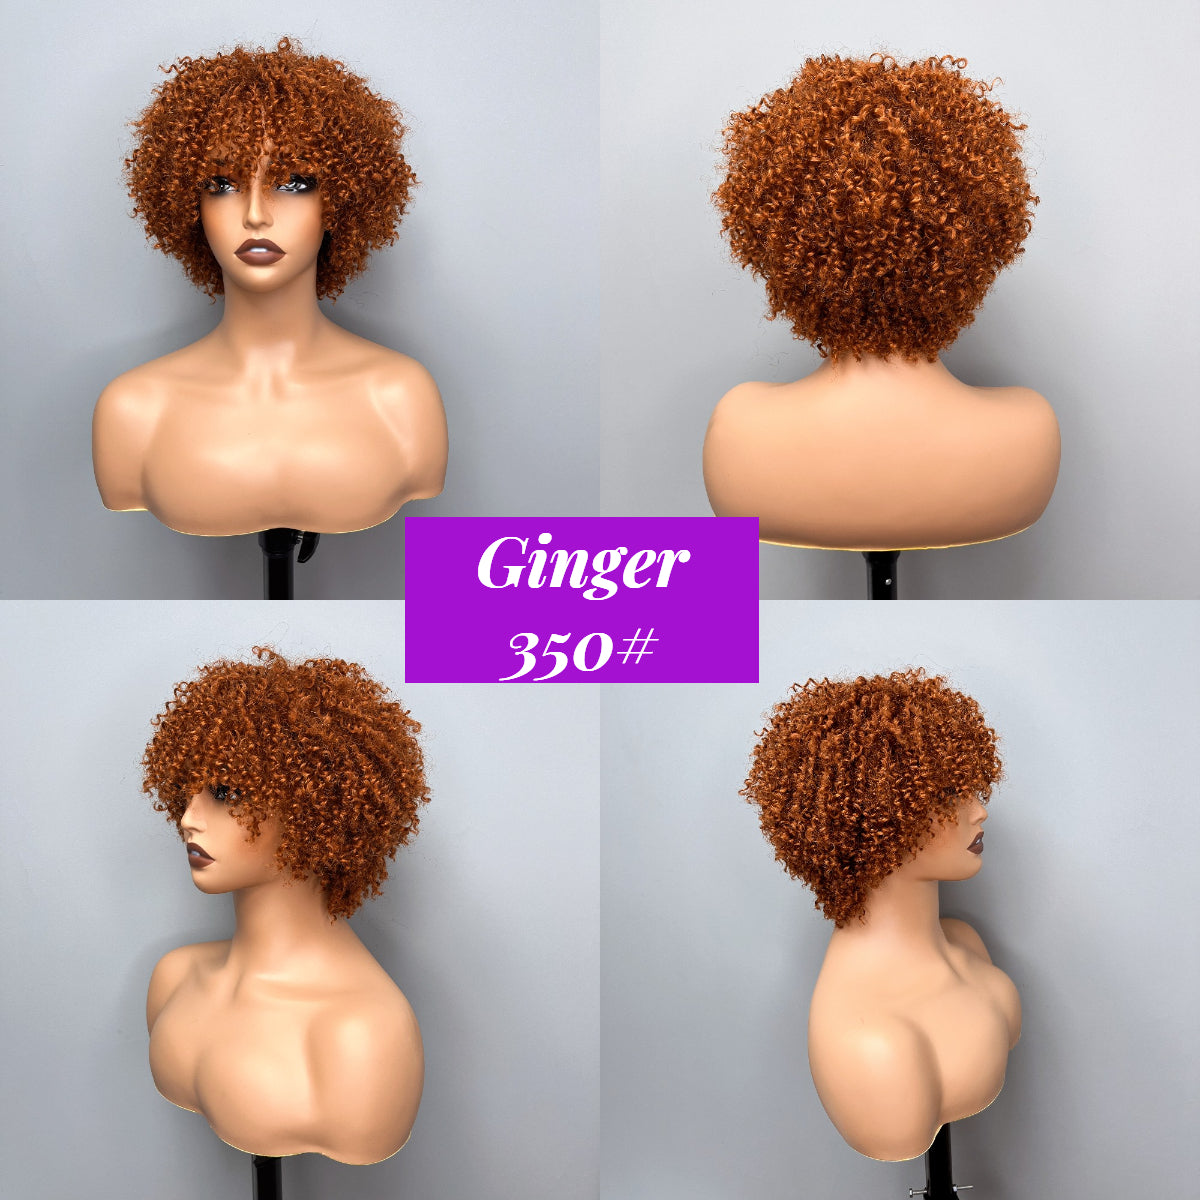 New 6 Inch Afro Kinky Curly Bob Wig With Bangs  Curly Pixie Cut Glueless Wig Machine Human Hair Wigs For Black Women -Amanda Hair